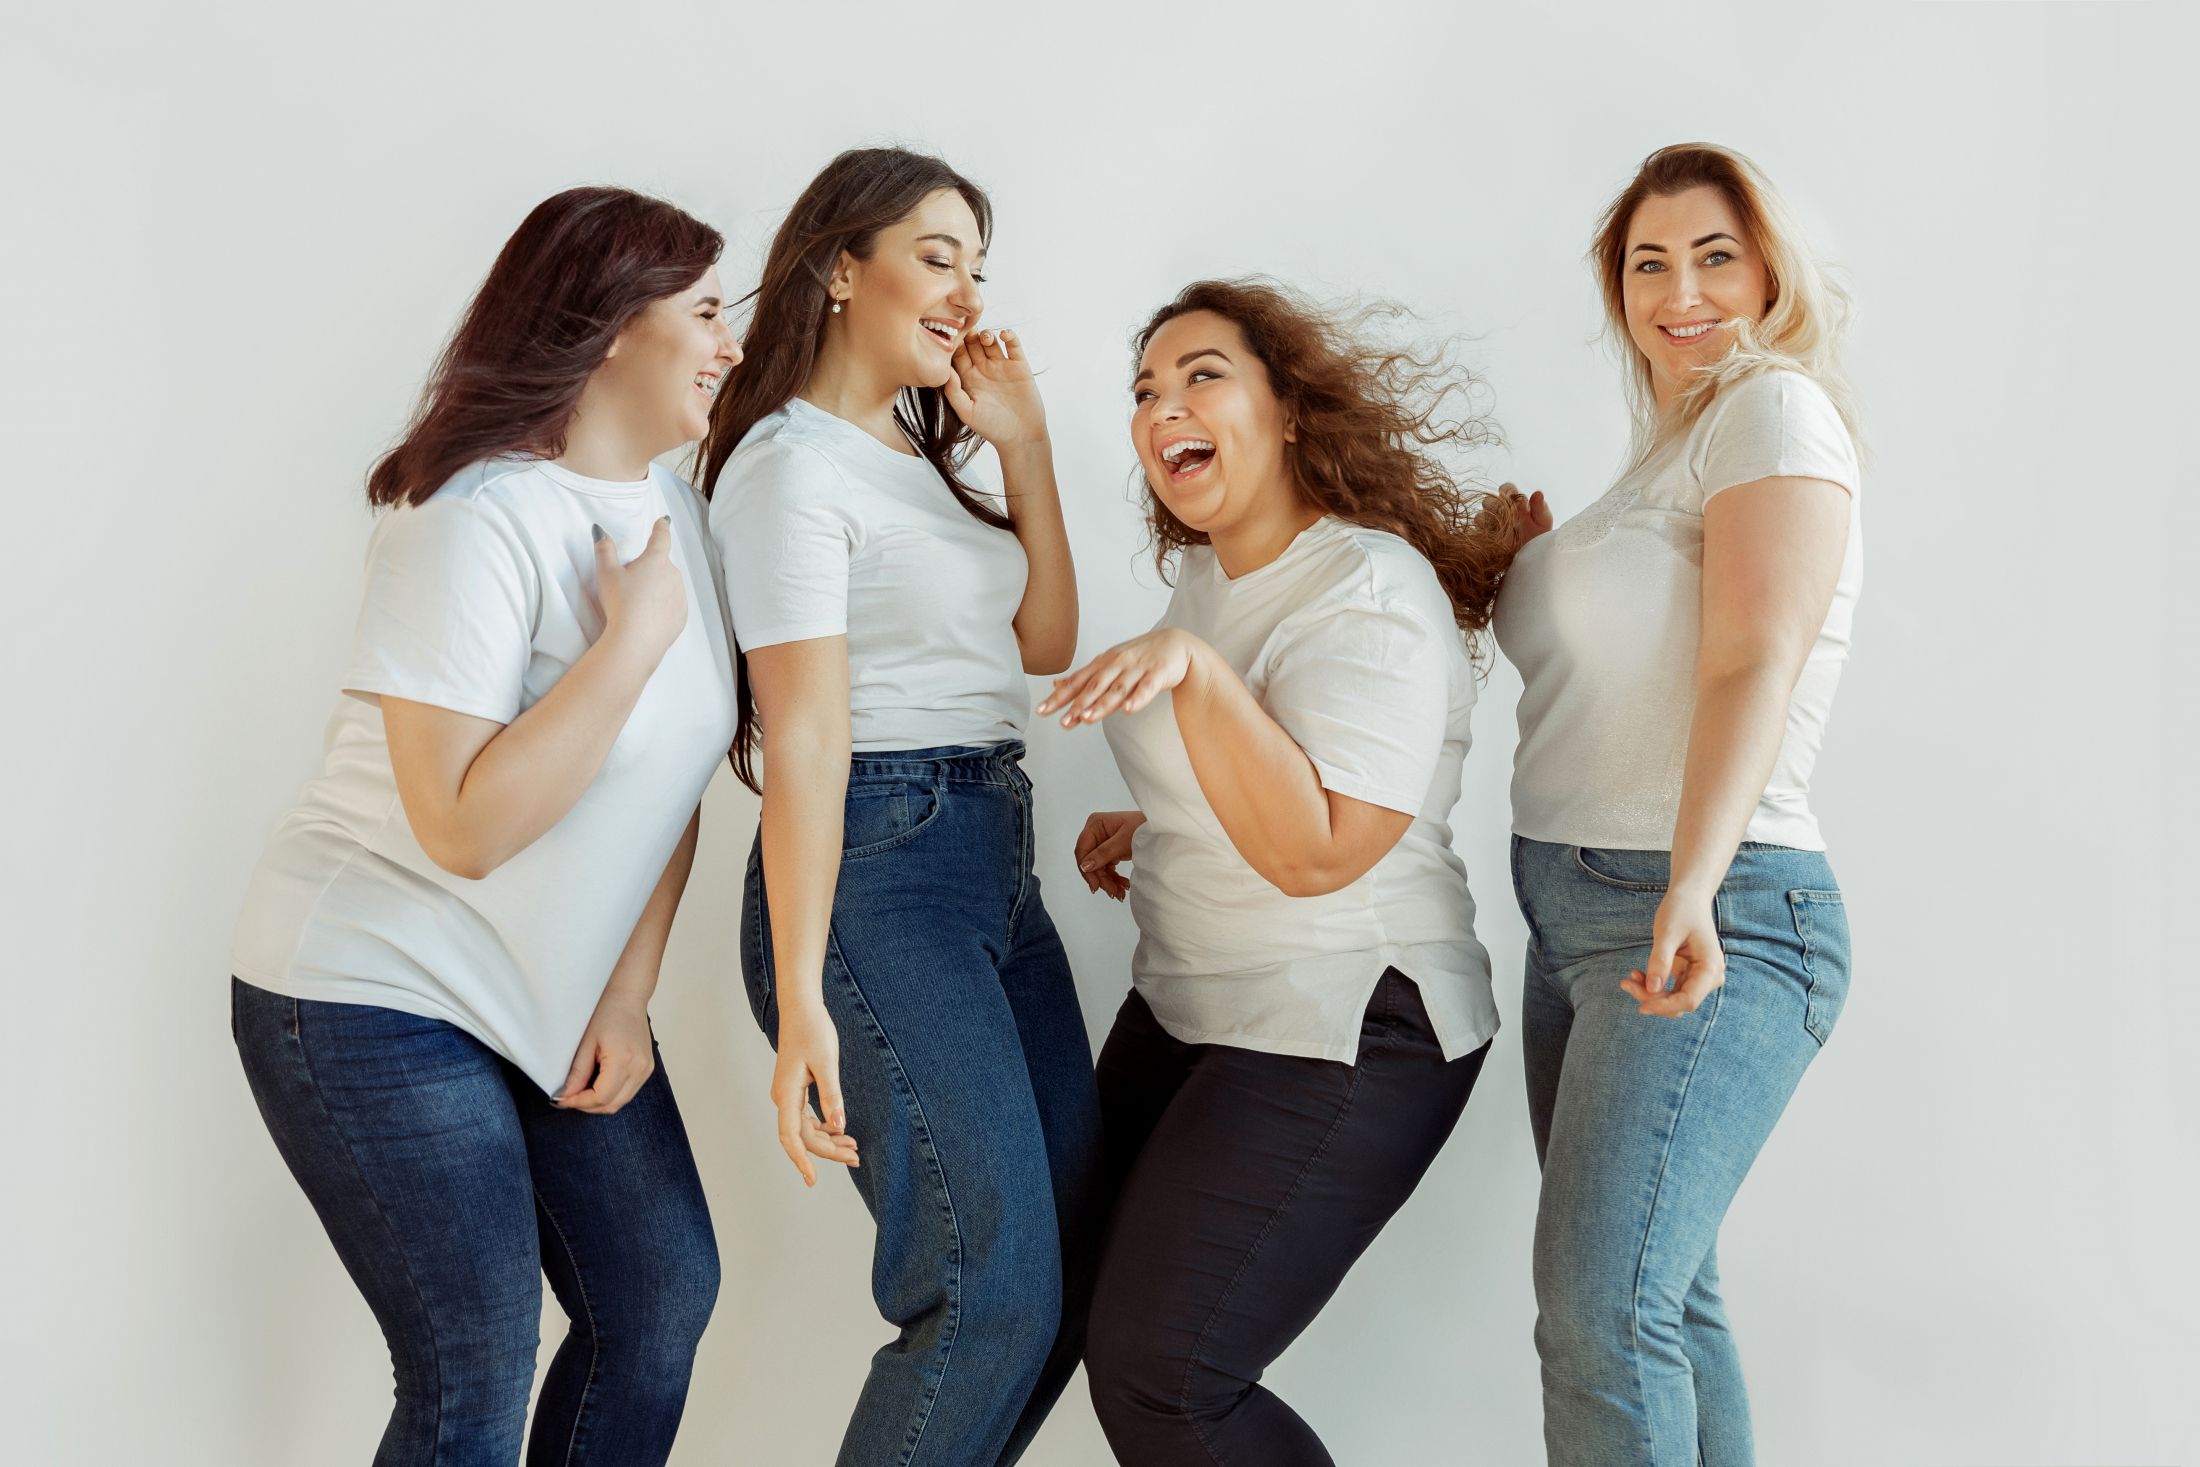 beautiful-young-caucasian-women-in-casual-having-fun-together-friends-posing-on-white-background-and-laughting-looks-happy-well-kept-bodypositive-feminism-loving-themself-beauty-concept.jpg